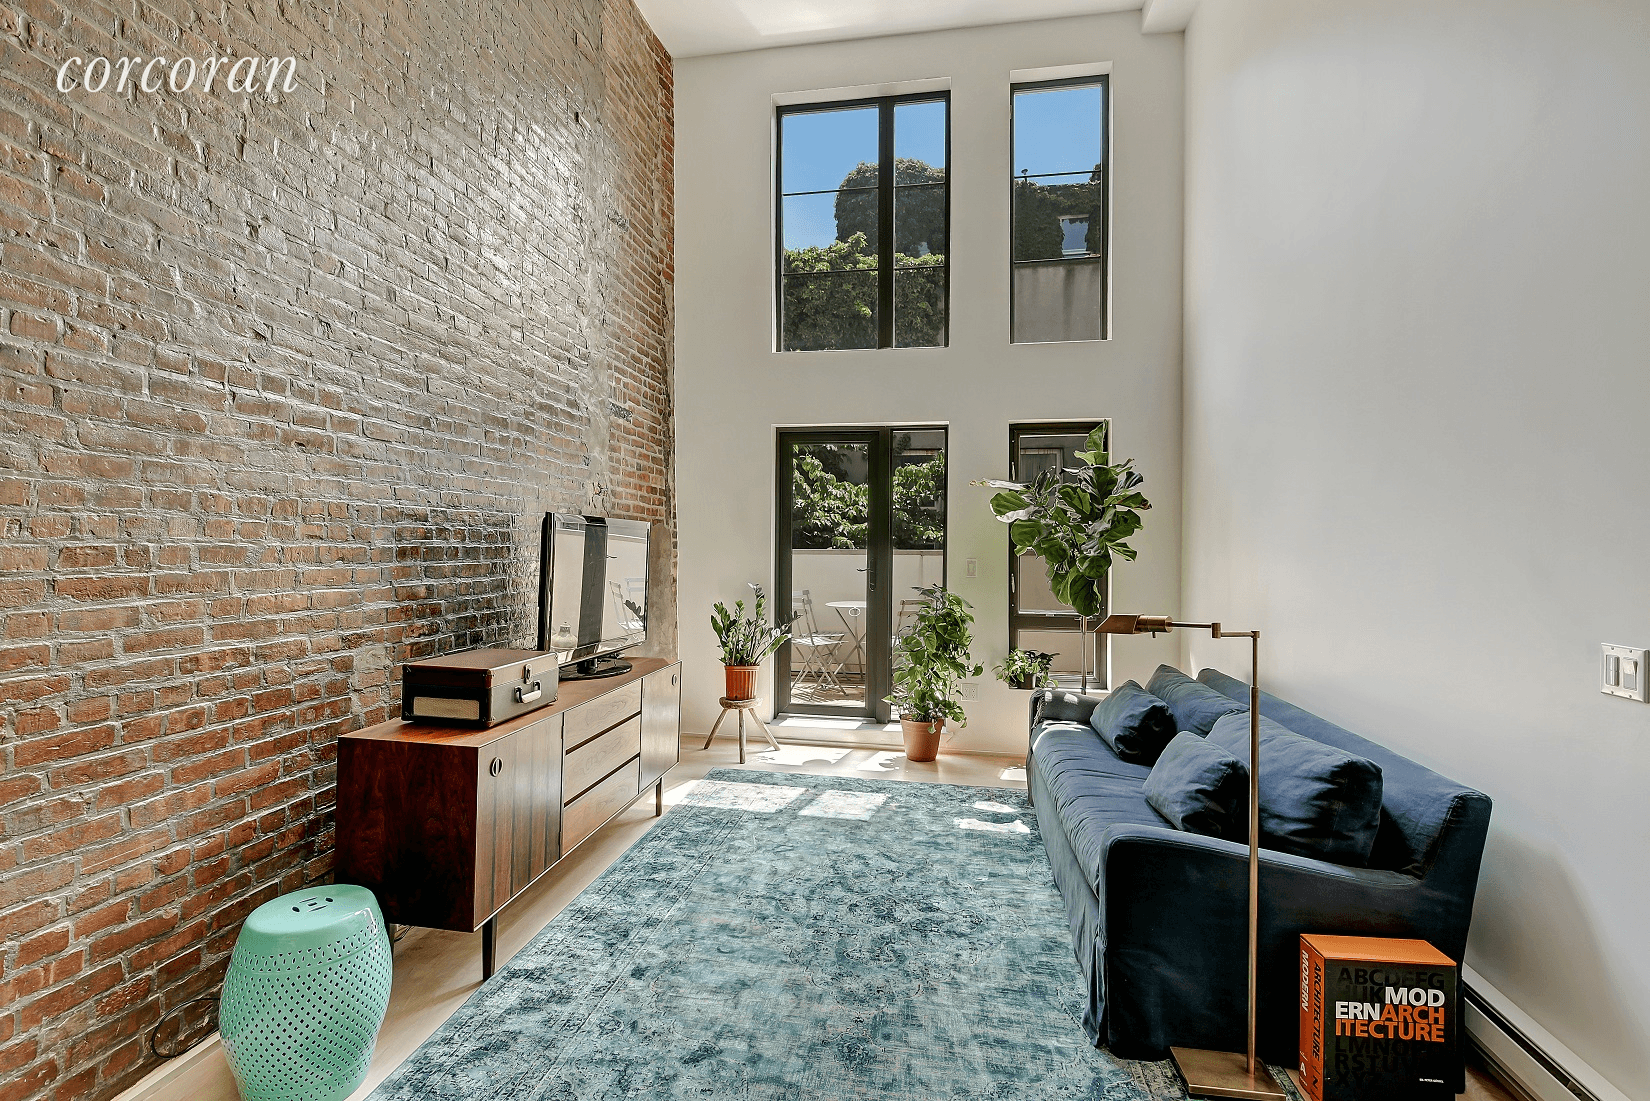 Welcome home to an incredible duplex loft apartment with a private TERRACE in south Williamsburg.